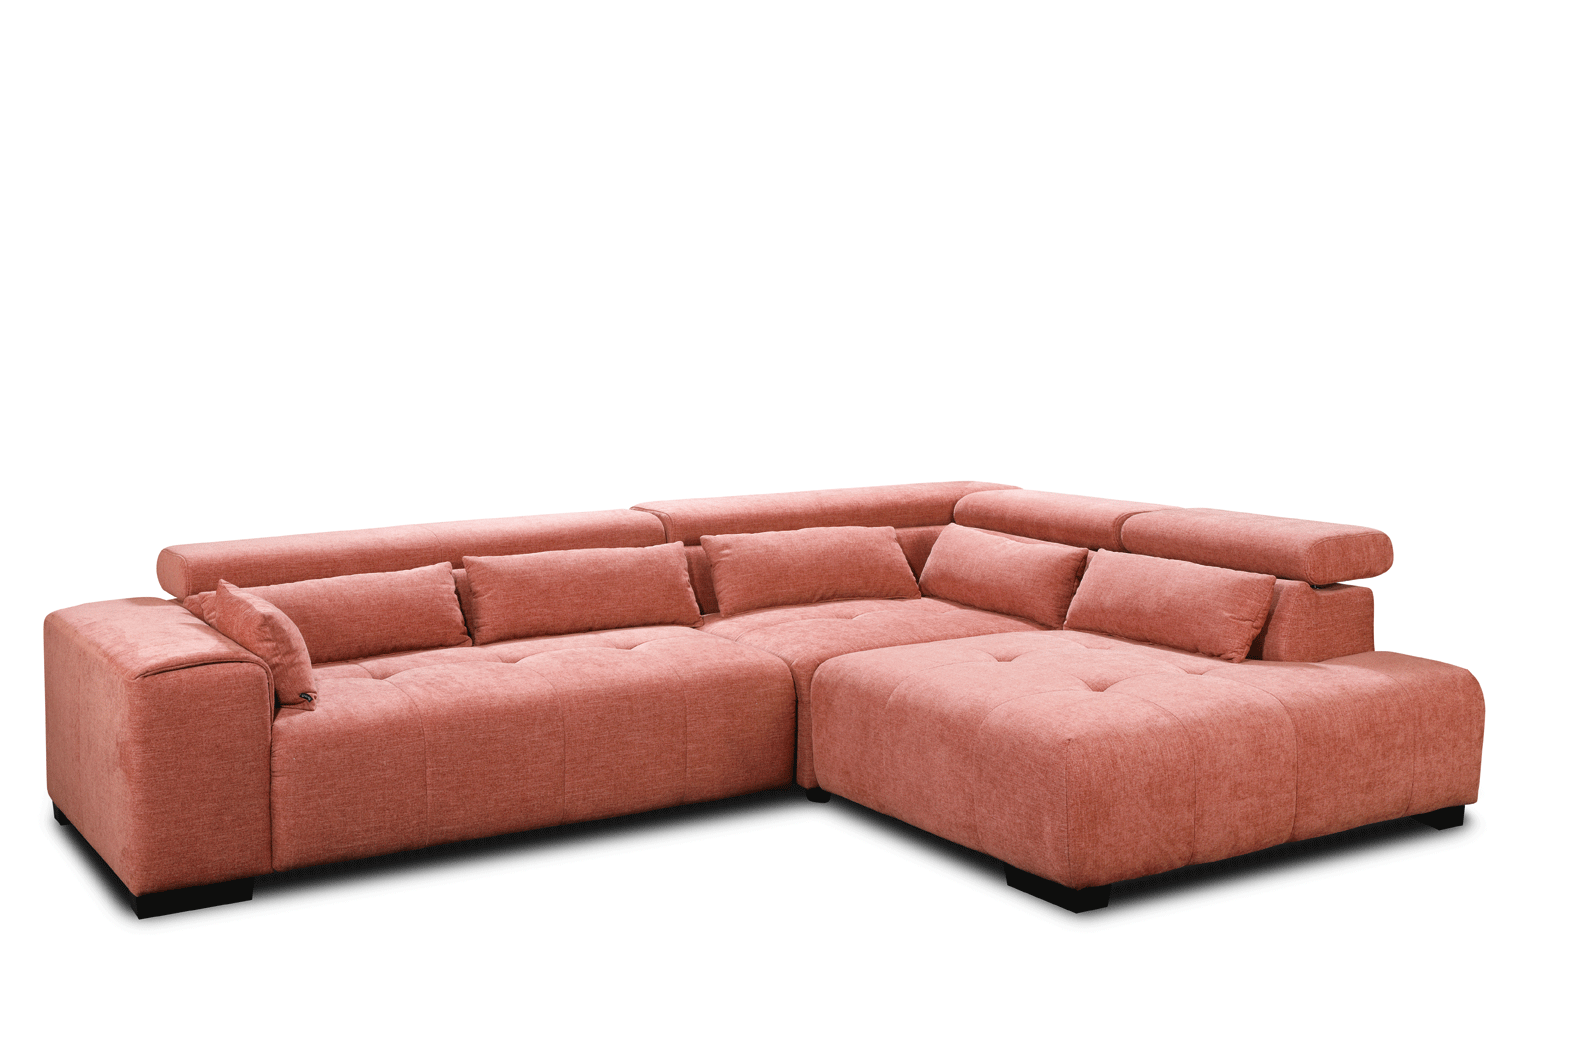 Living Room Furniture Sleepers Sofas Loveseats and Chairs Positano Sectional w/Bed & Storage